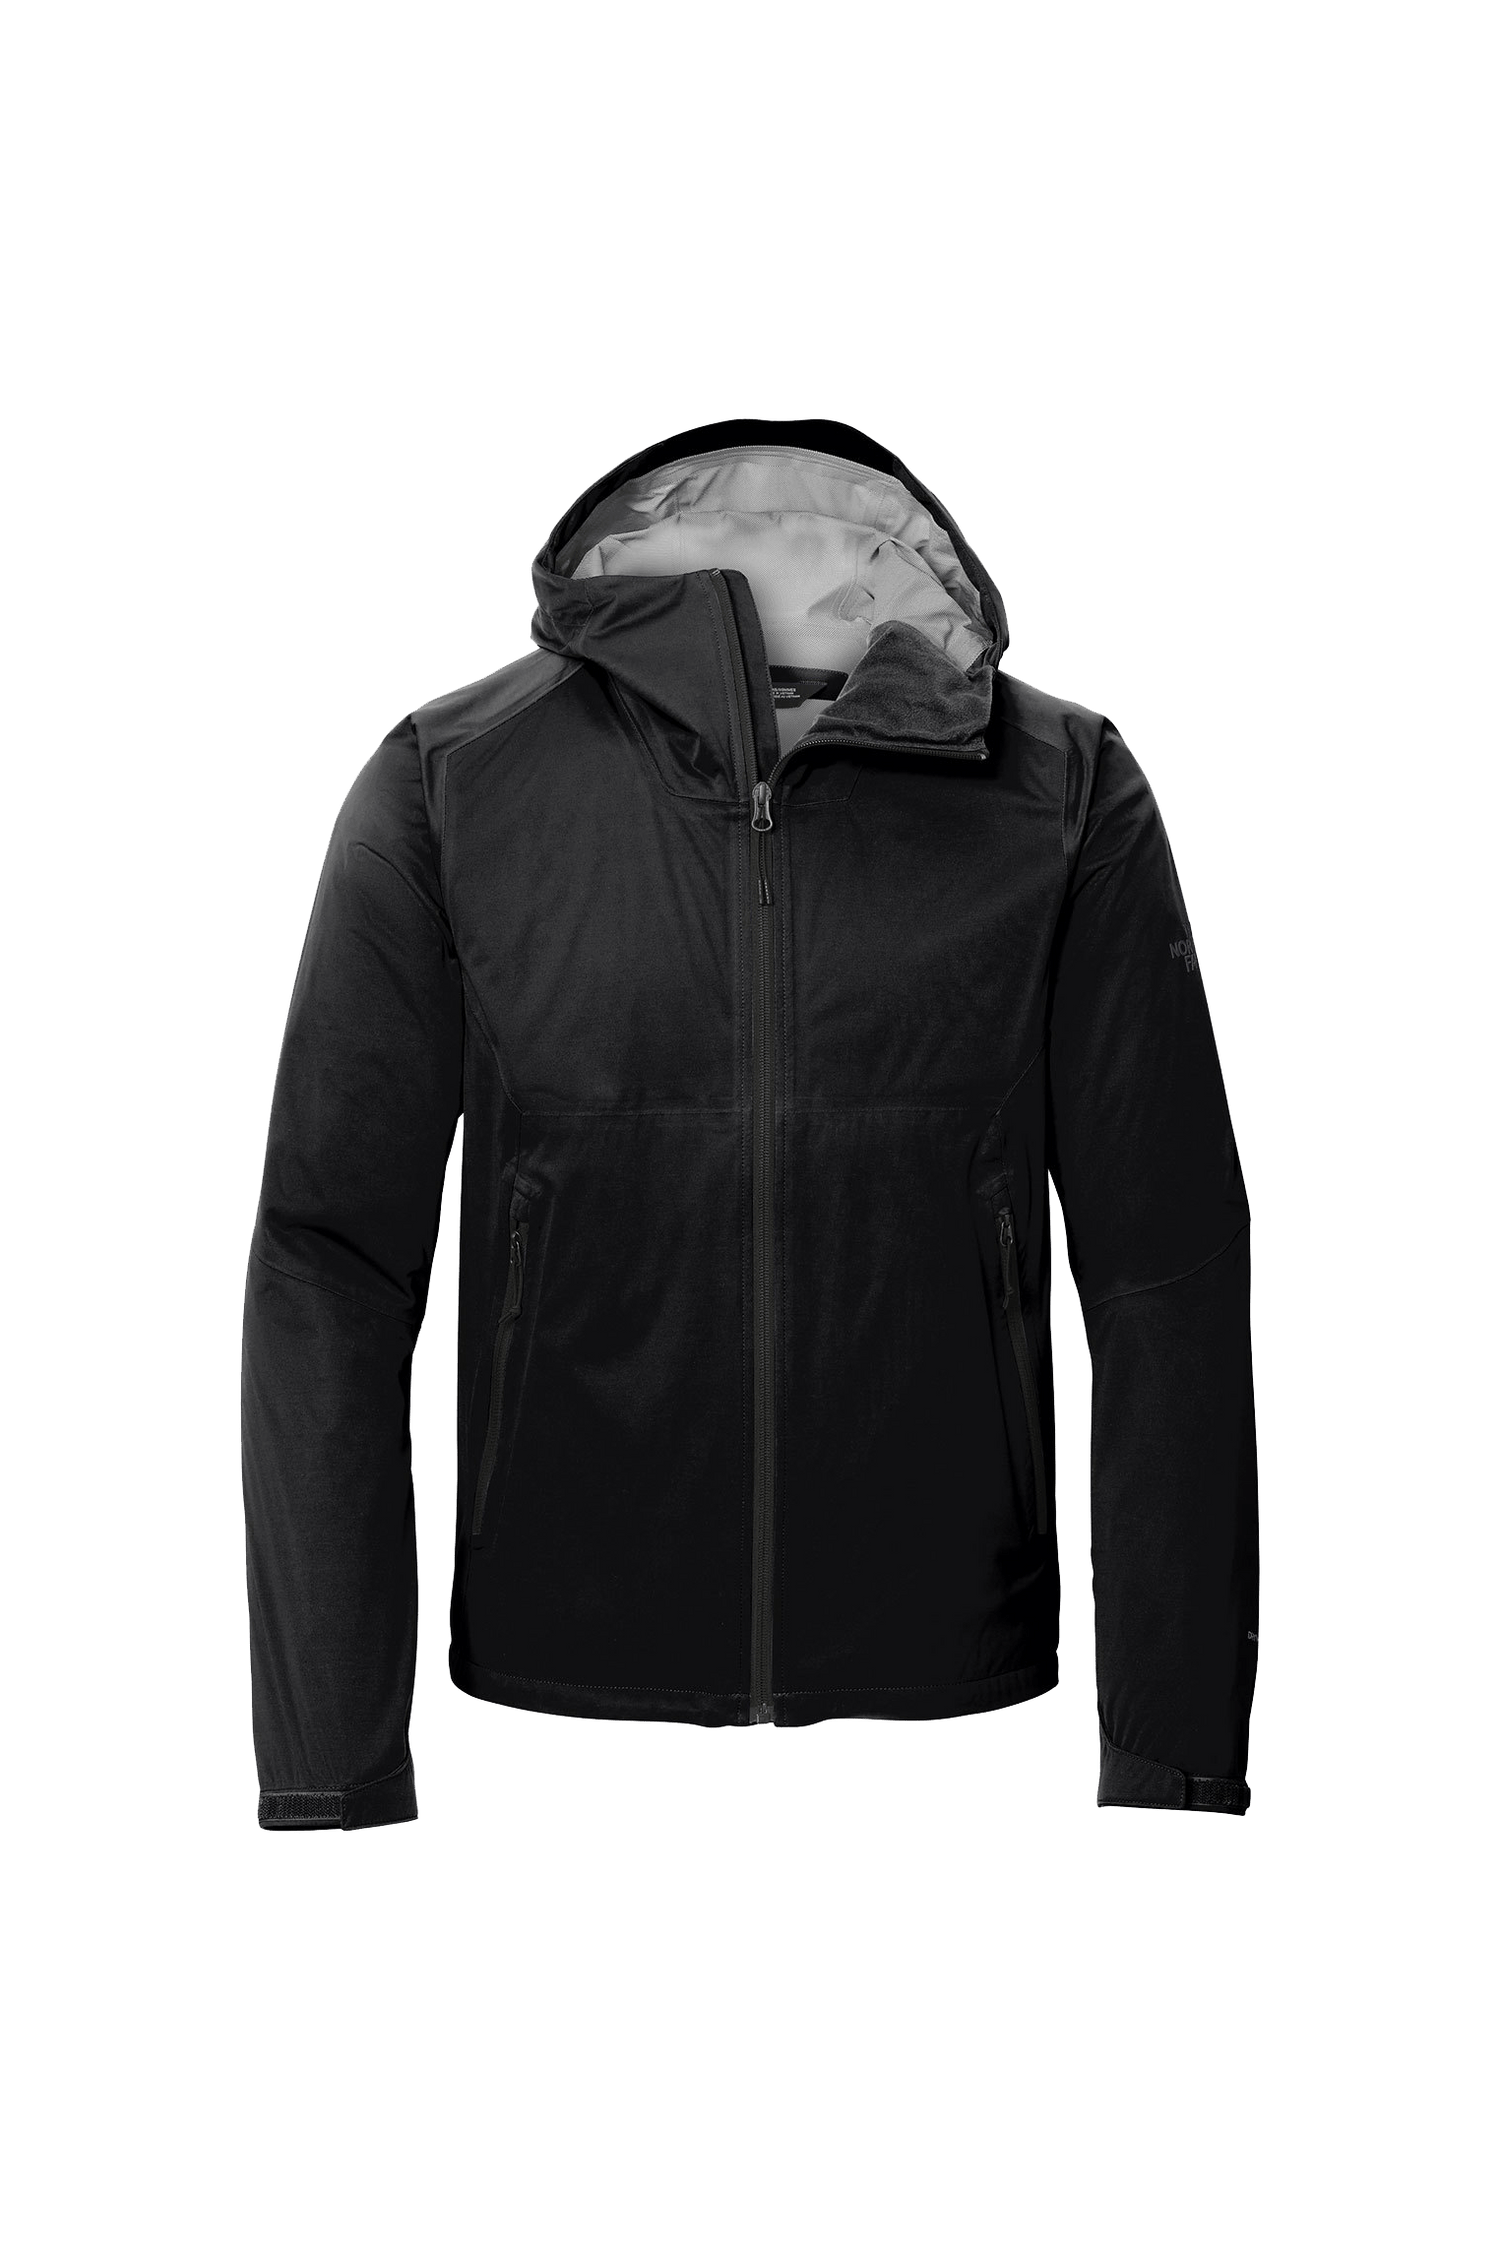 TNF Black / SM Custom The North Face All-Weather DryVent Stretch Jacket